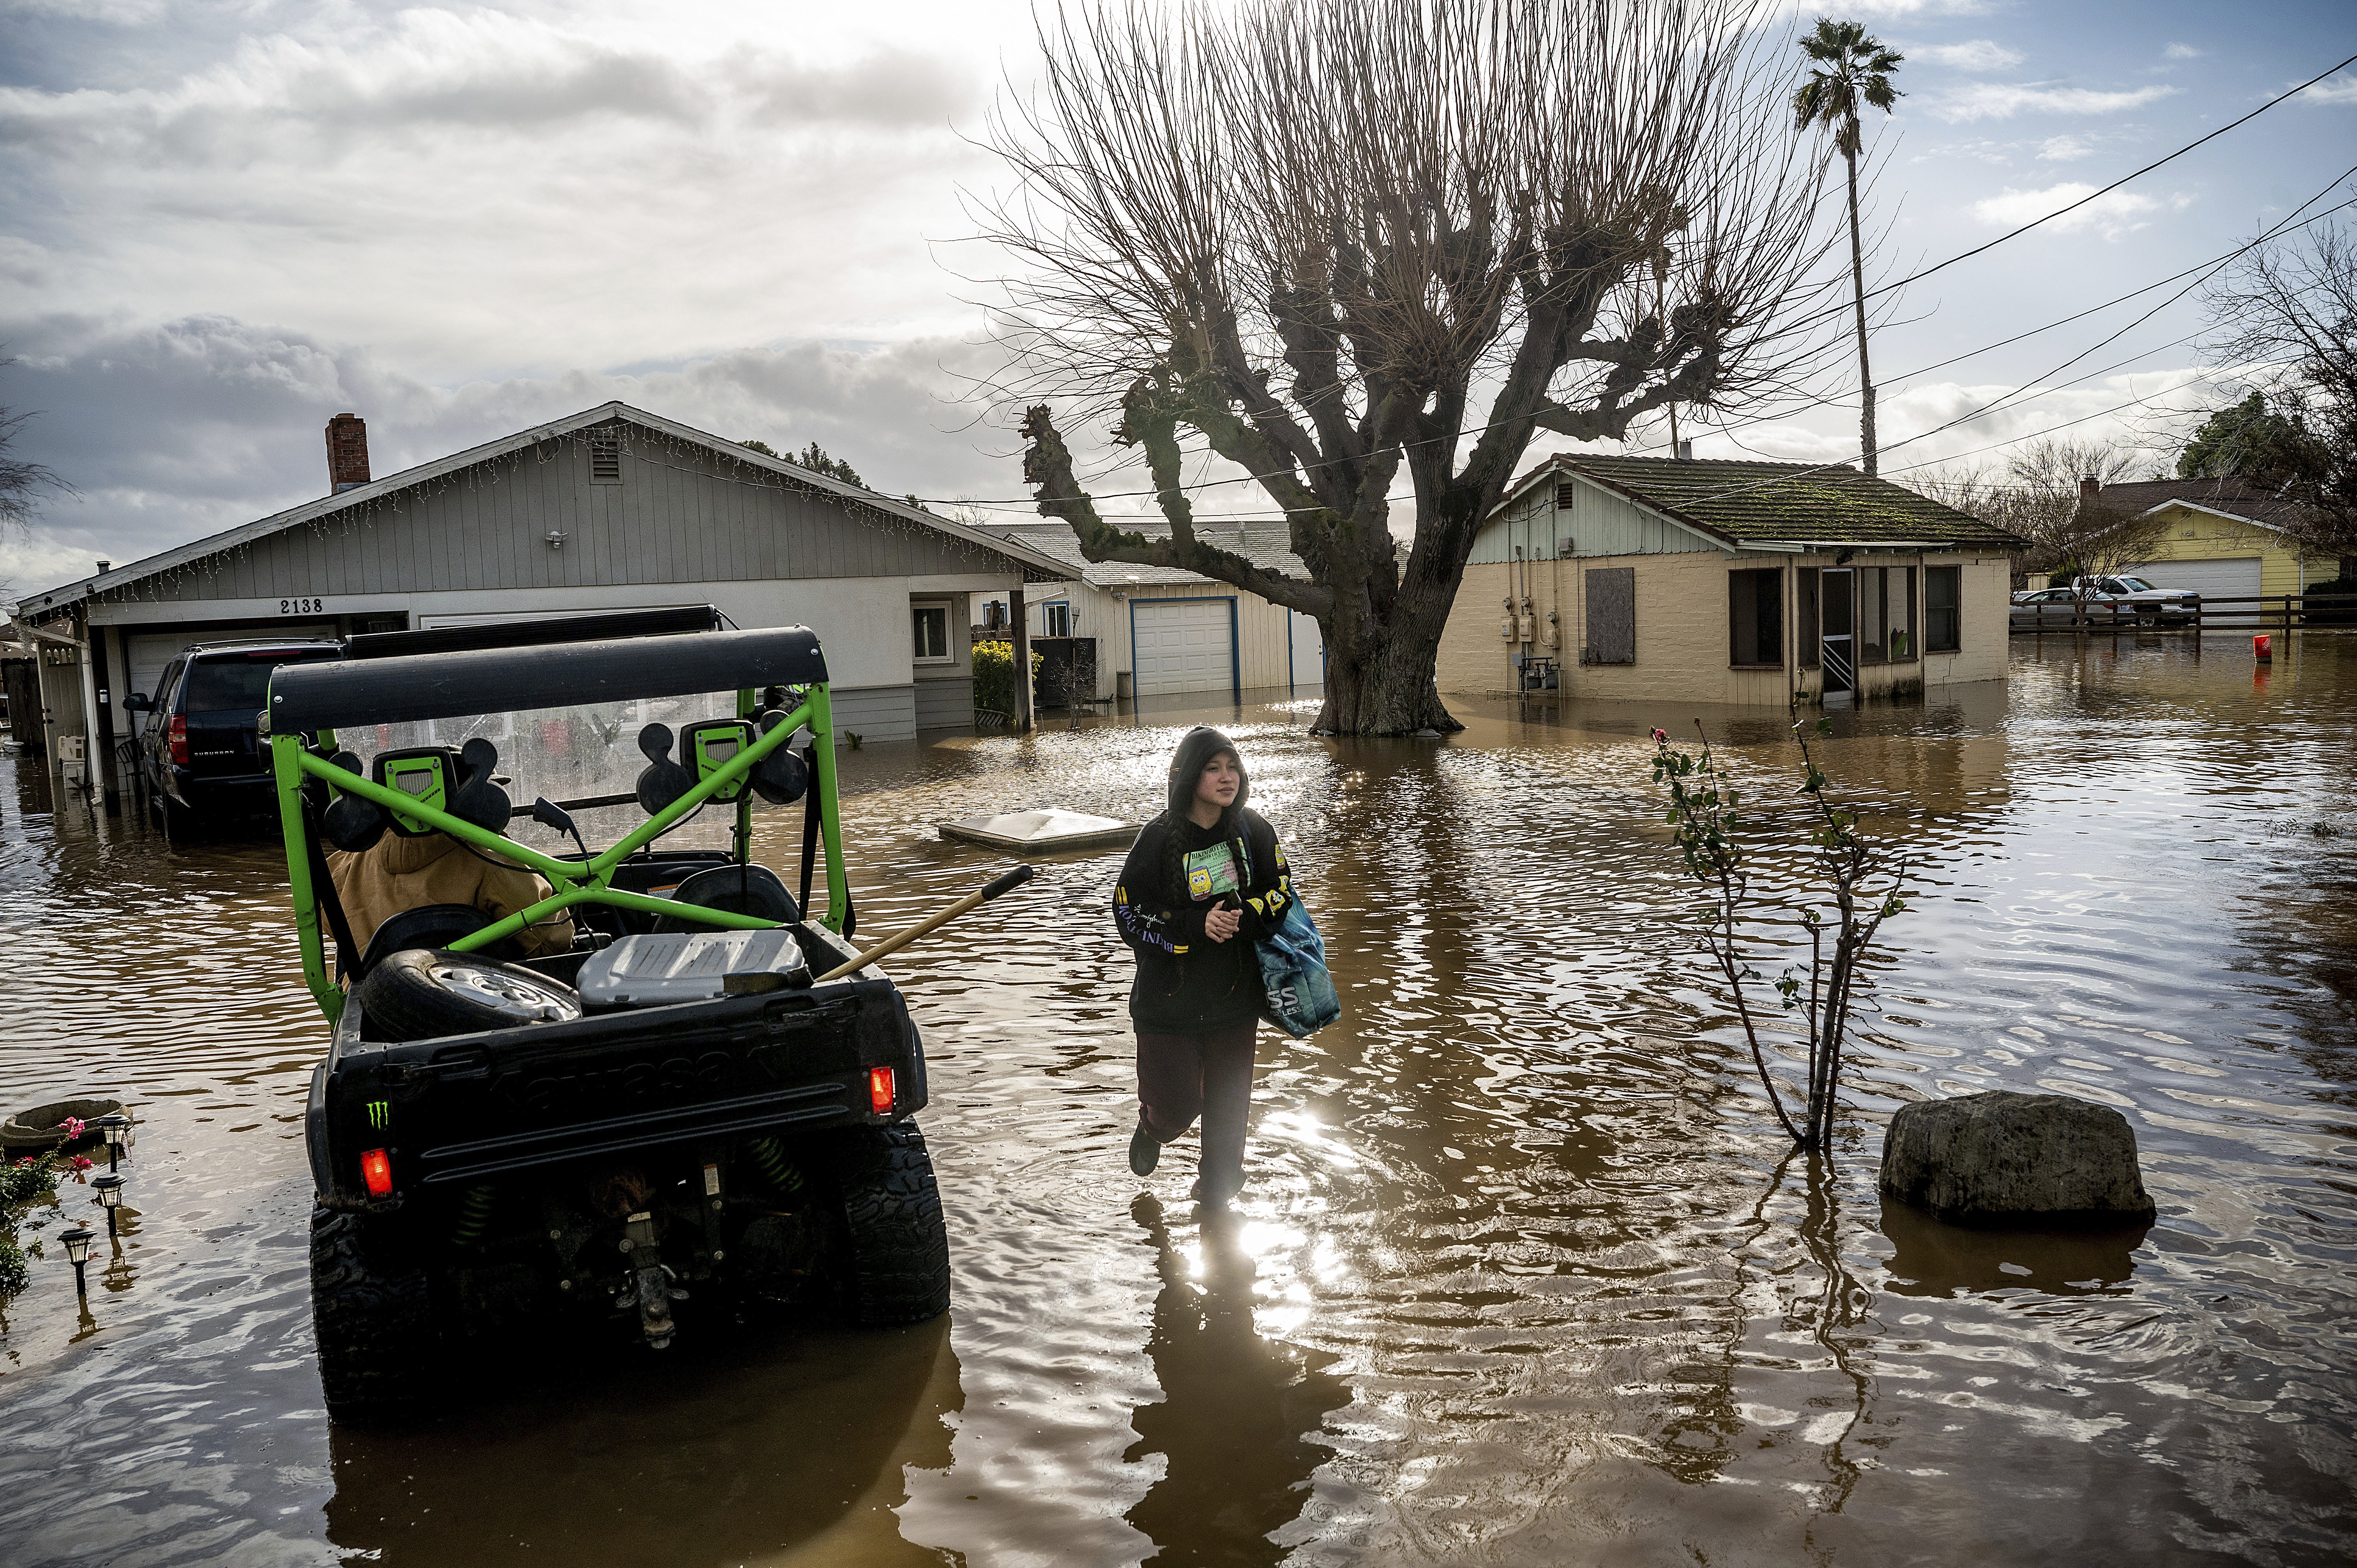 Brenda Ortega, 15, salvages items from her flooded Merced, Calif., home on Tuesday, Jan. 10, 2023.  